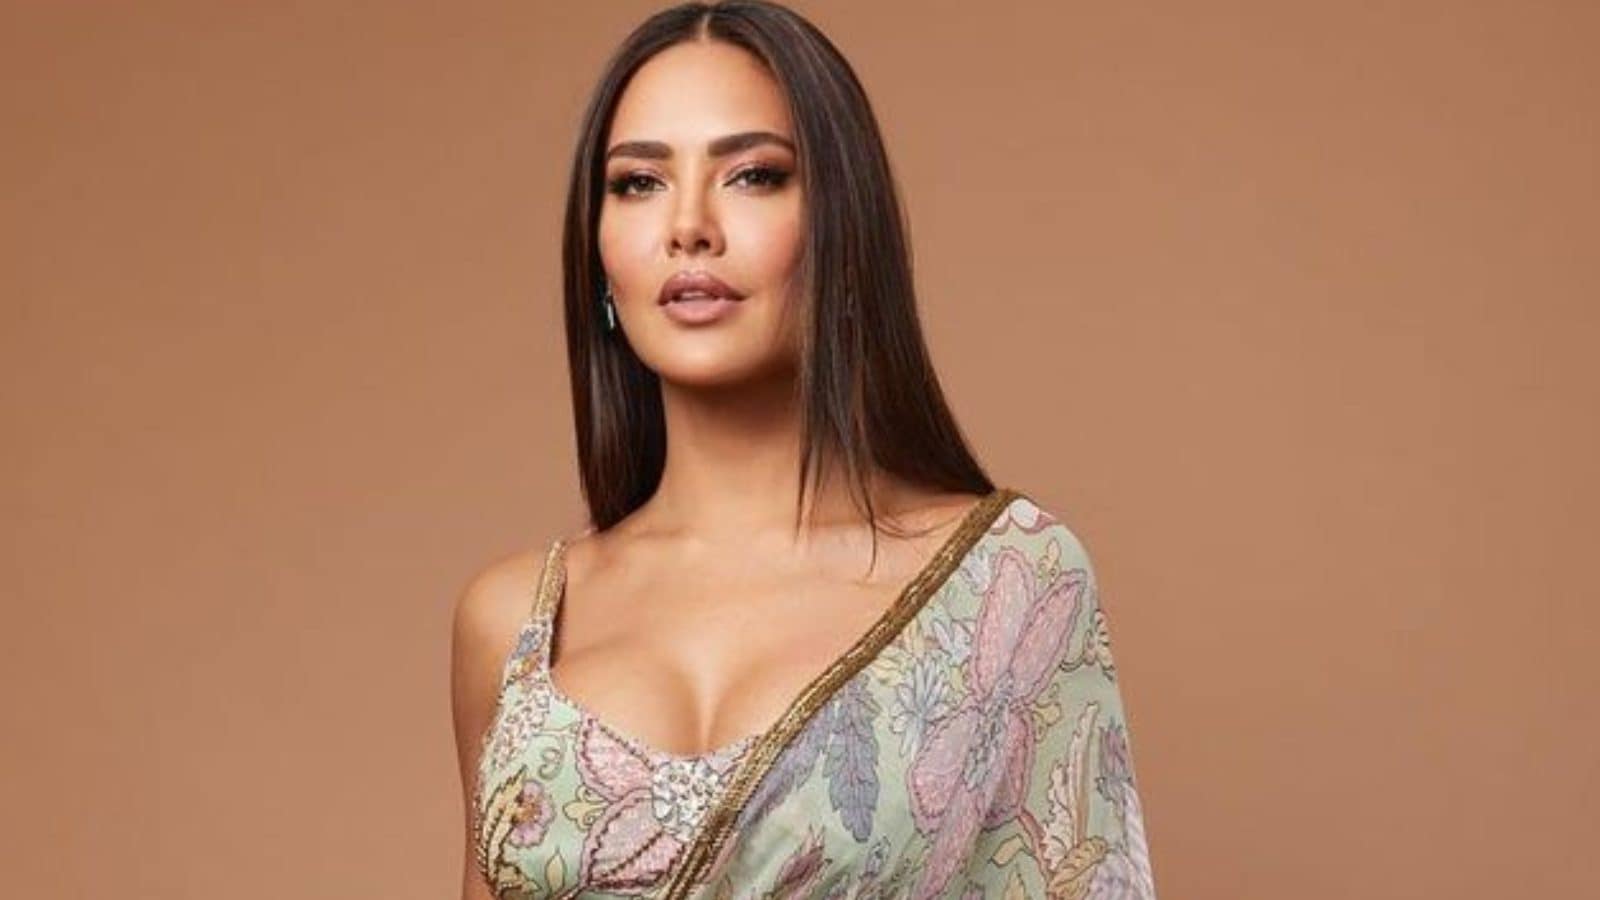 Aashram 3 Actress Esha Gupta Has Hilarious Reply to Paparazzi Who Asked Her About Marriage, Watch